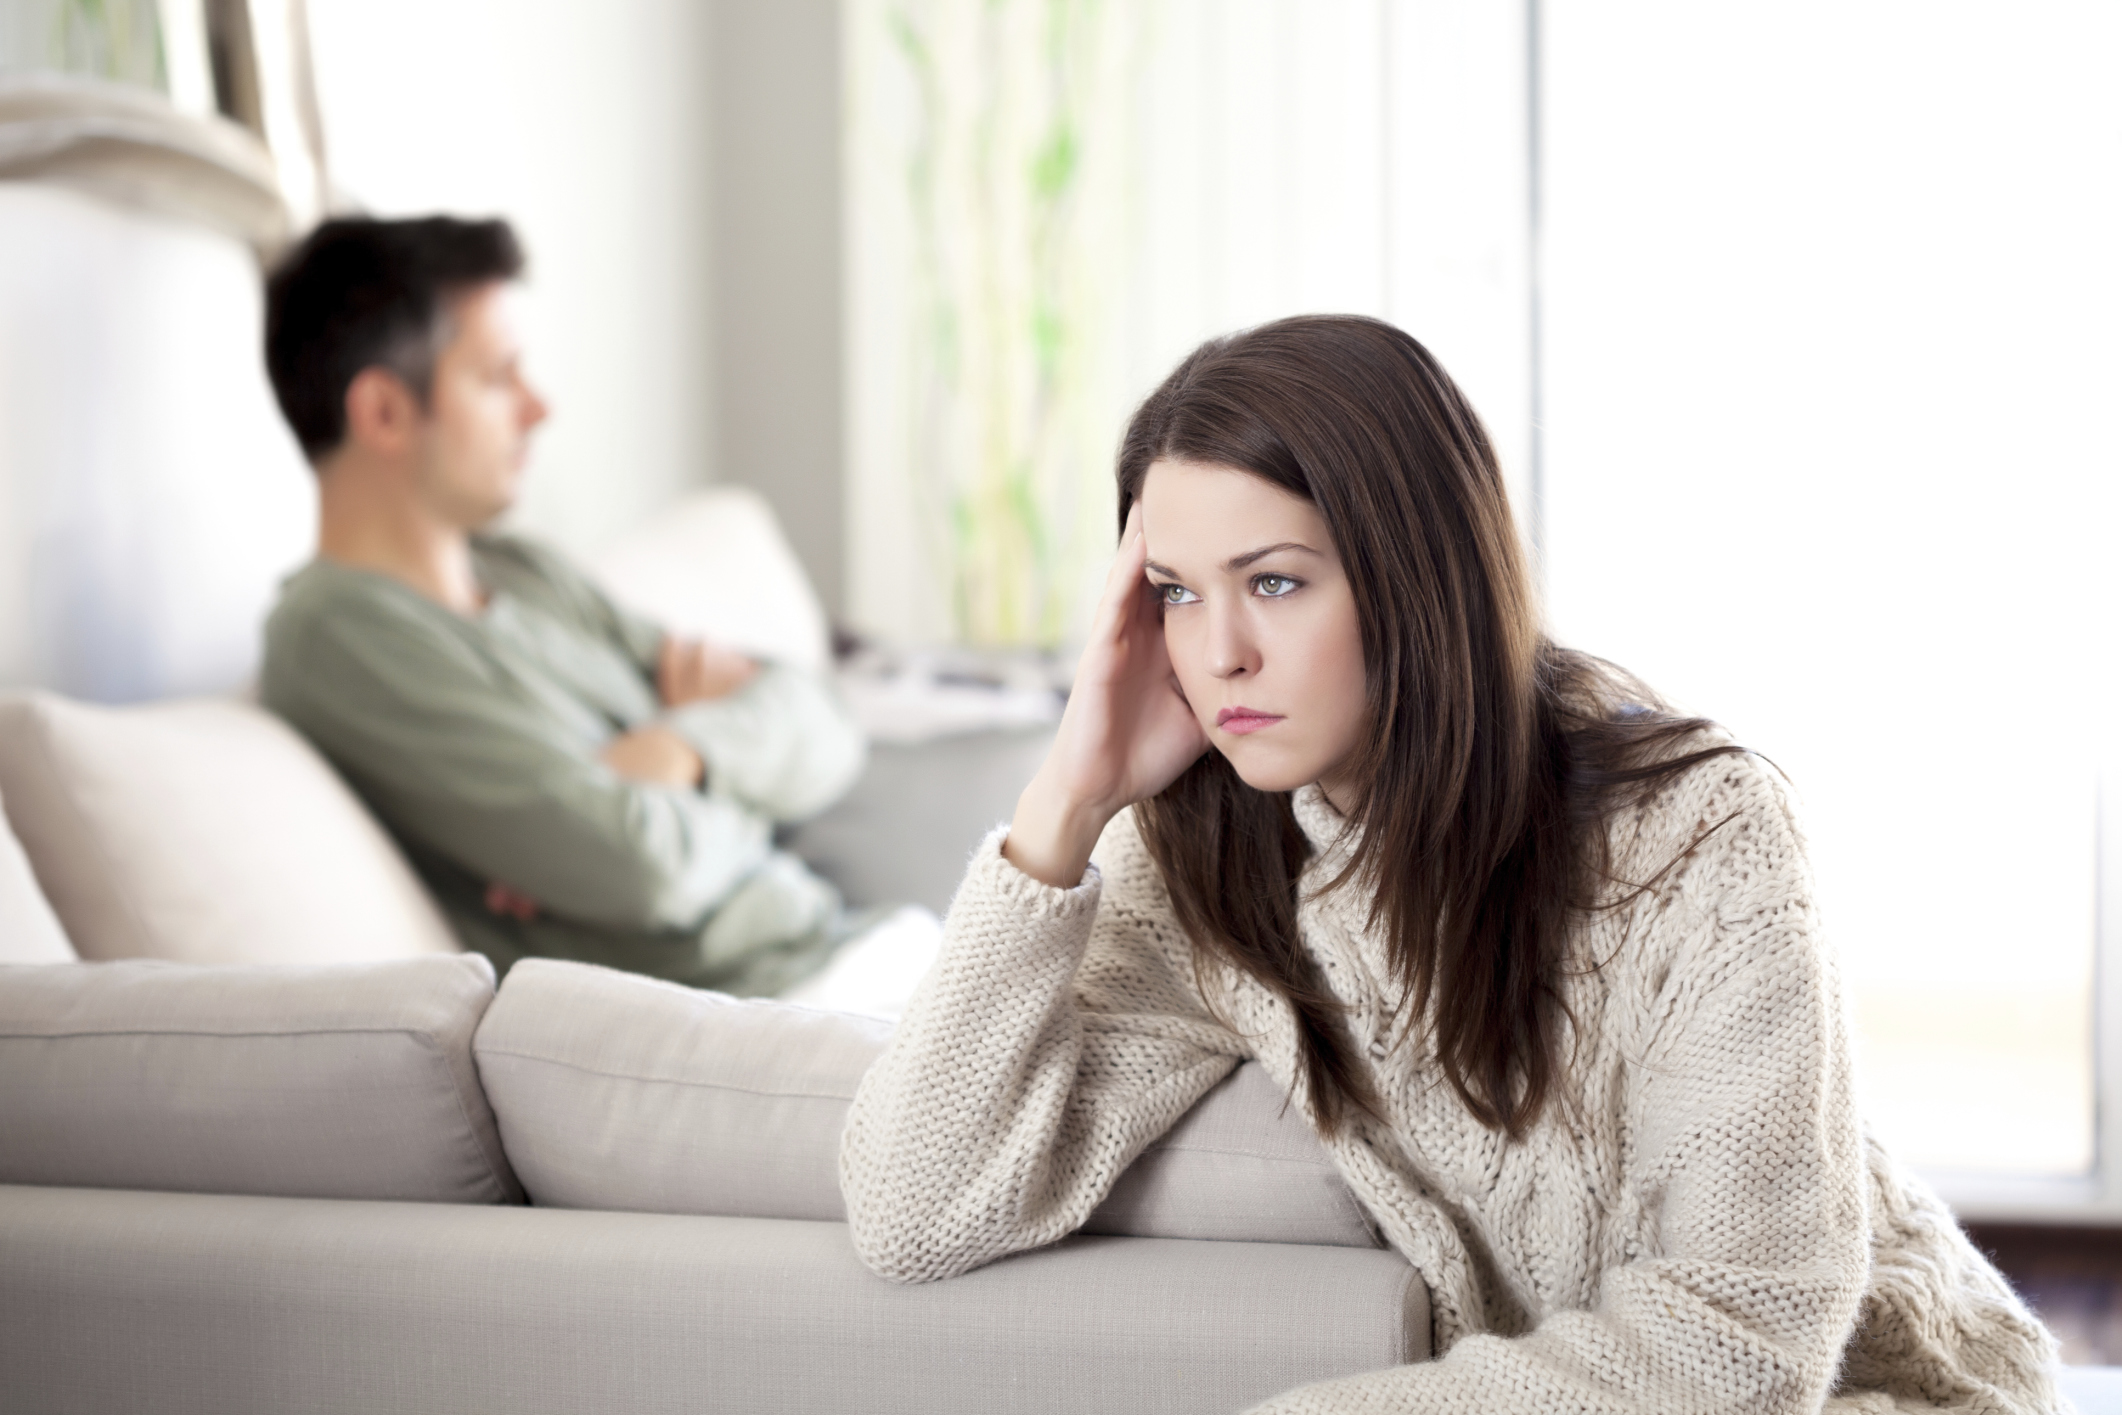 Things to Consider Before Filing for Divorce